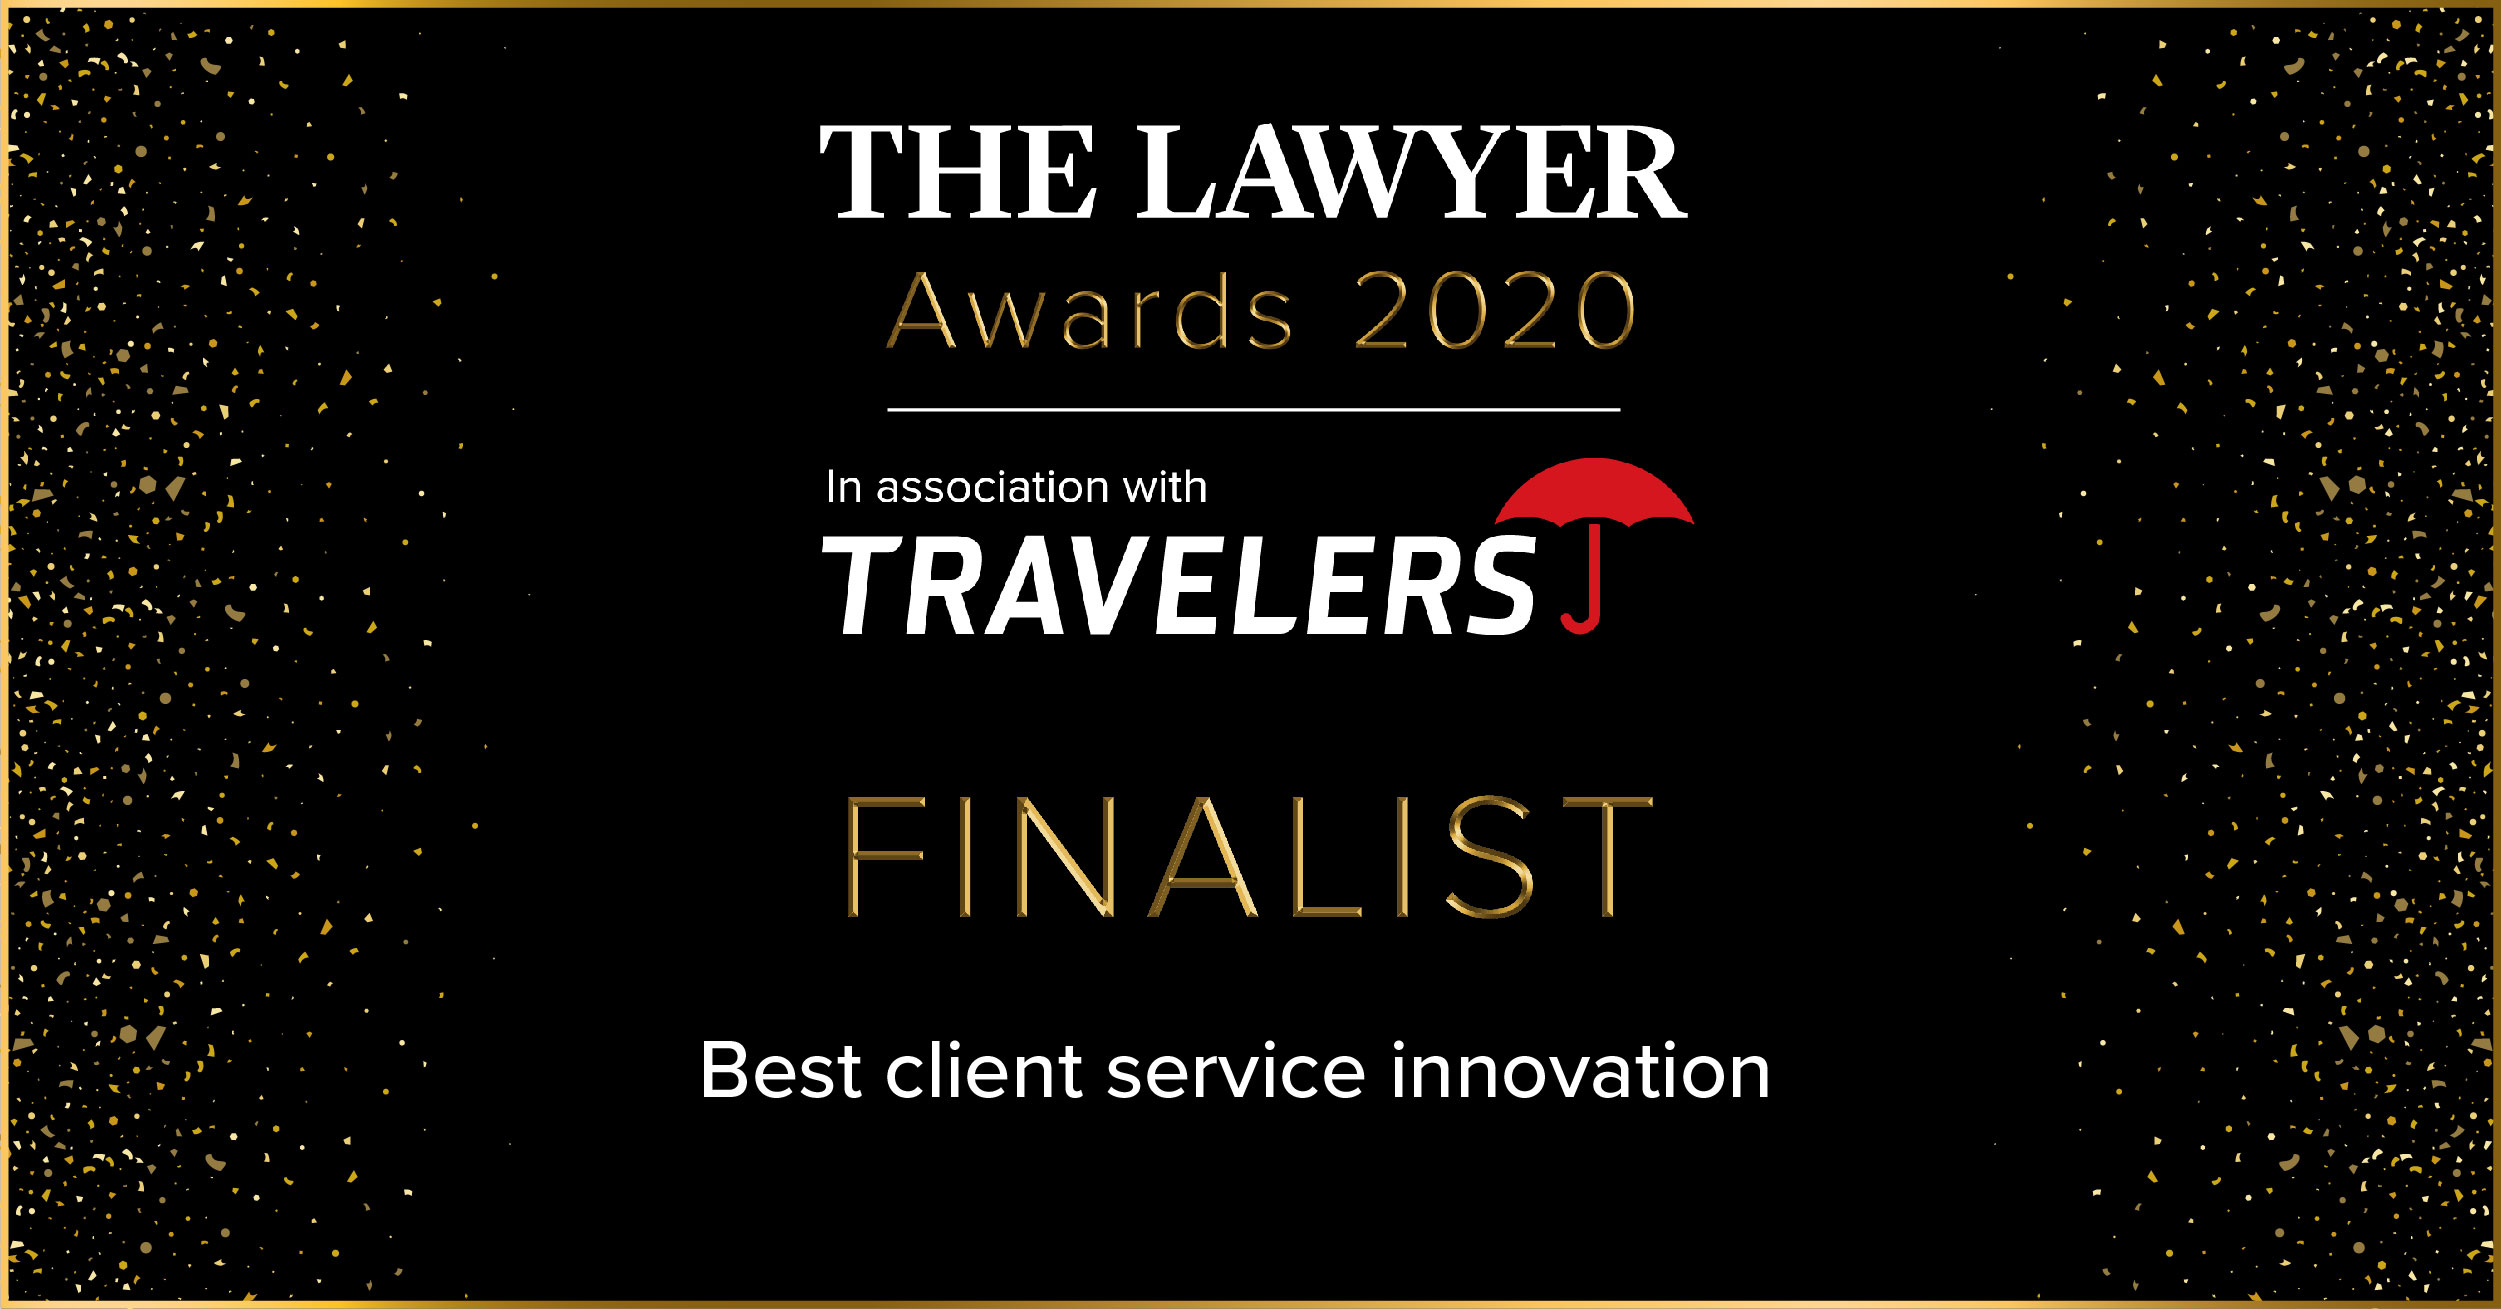 The Lawyer Awards 2020 Finalist Best Client Service Innovation